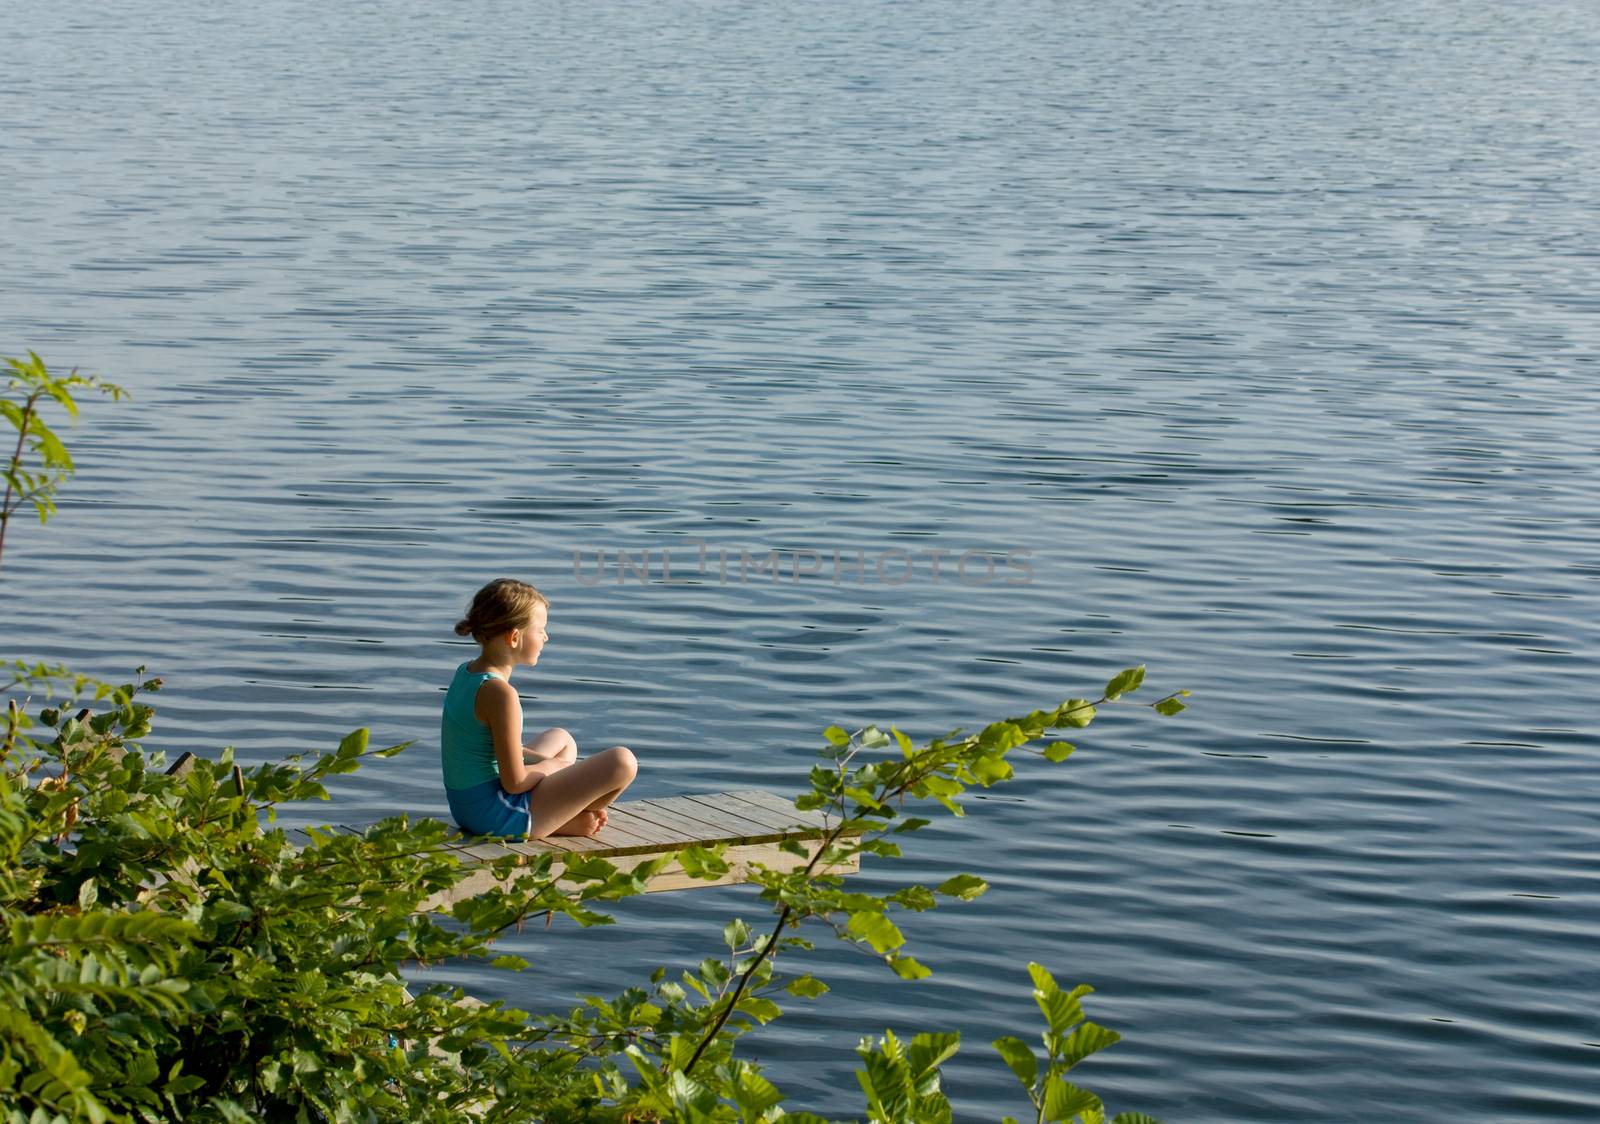 Little girl meditating by the lake by kavring